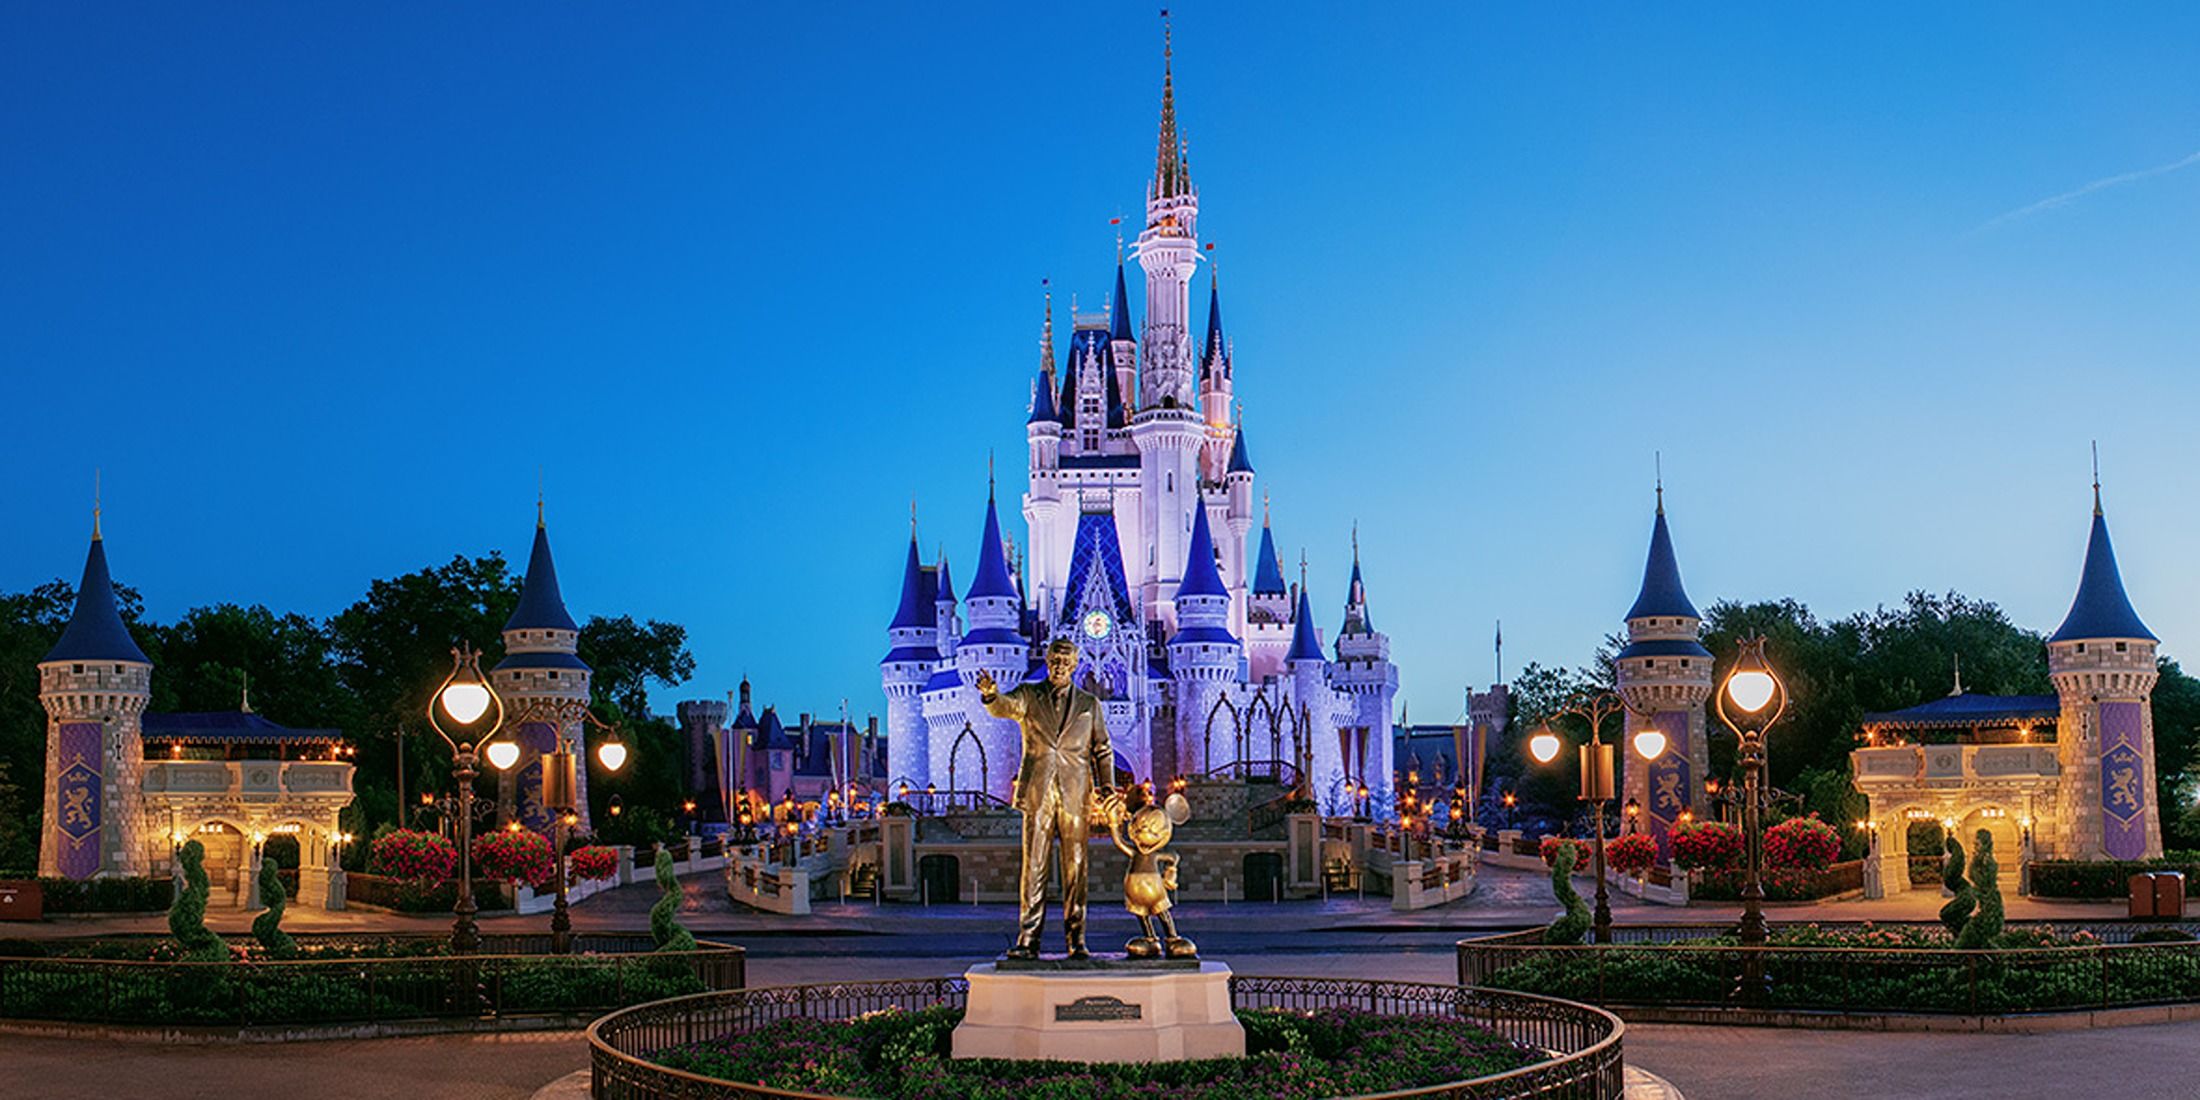 Disney announces changes coming to parks this year